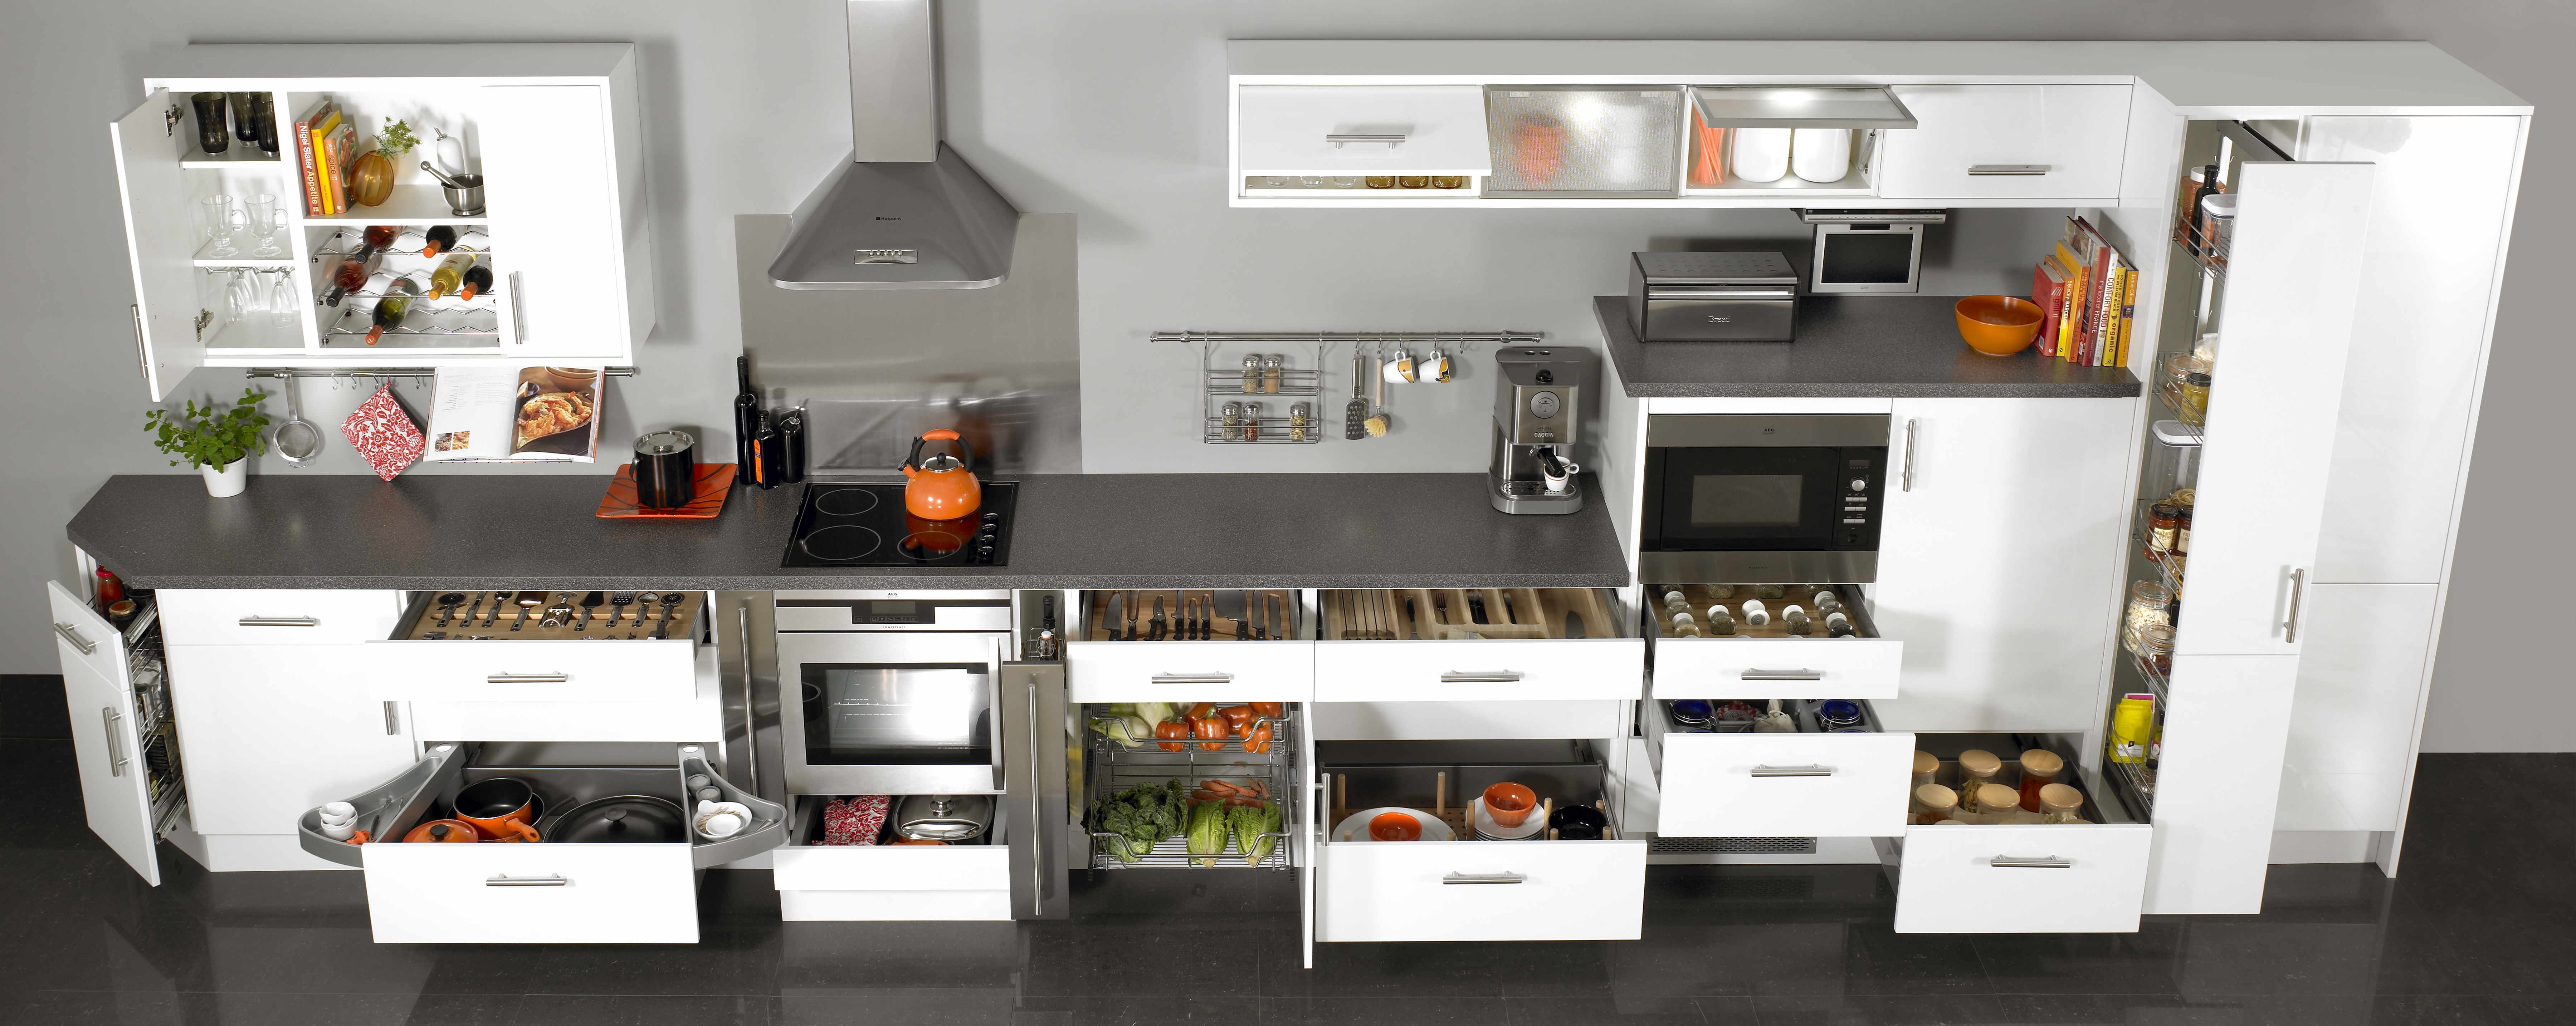 ... kitchen accessories stainless steel cabinet with drawers for ... XMGIPKN